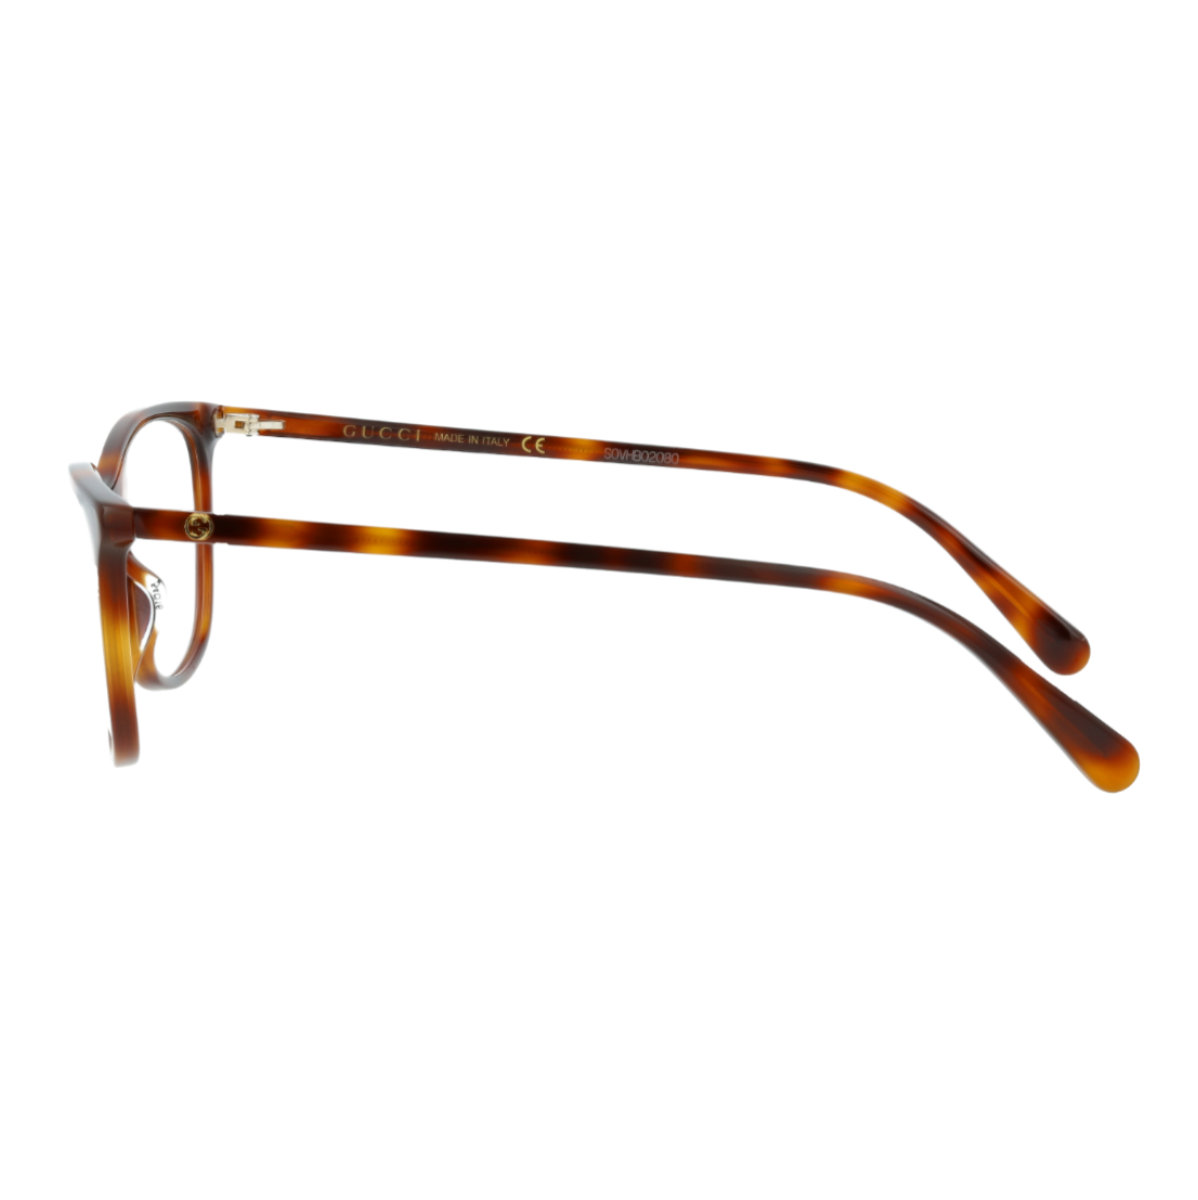 "Gucci Women's Eyewear - Model 0549O frames, elevate your look with Optorium's fashionable selection."